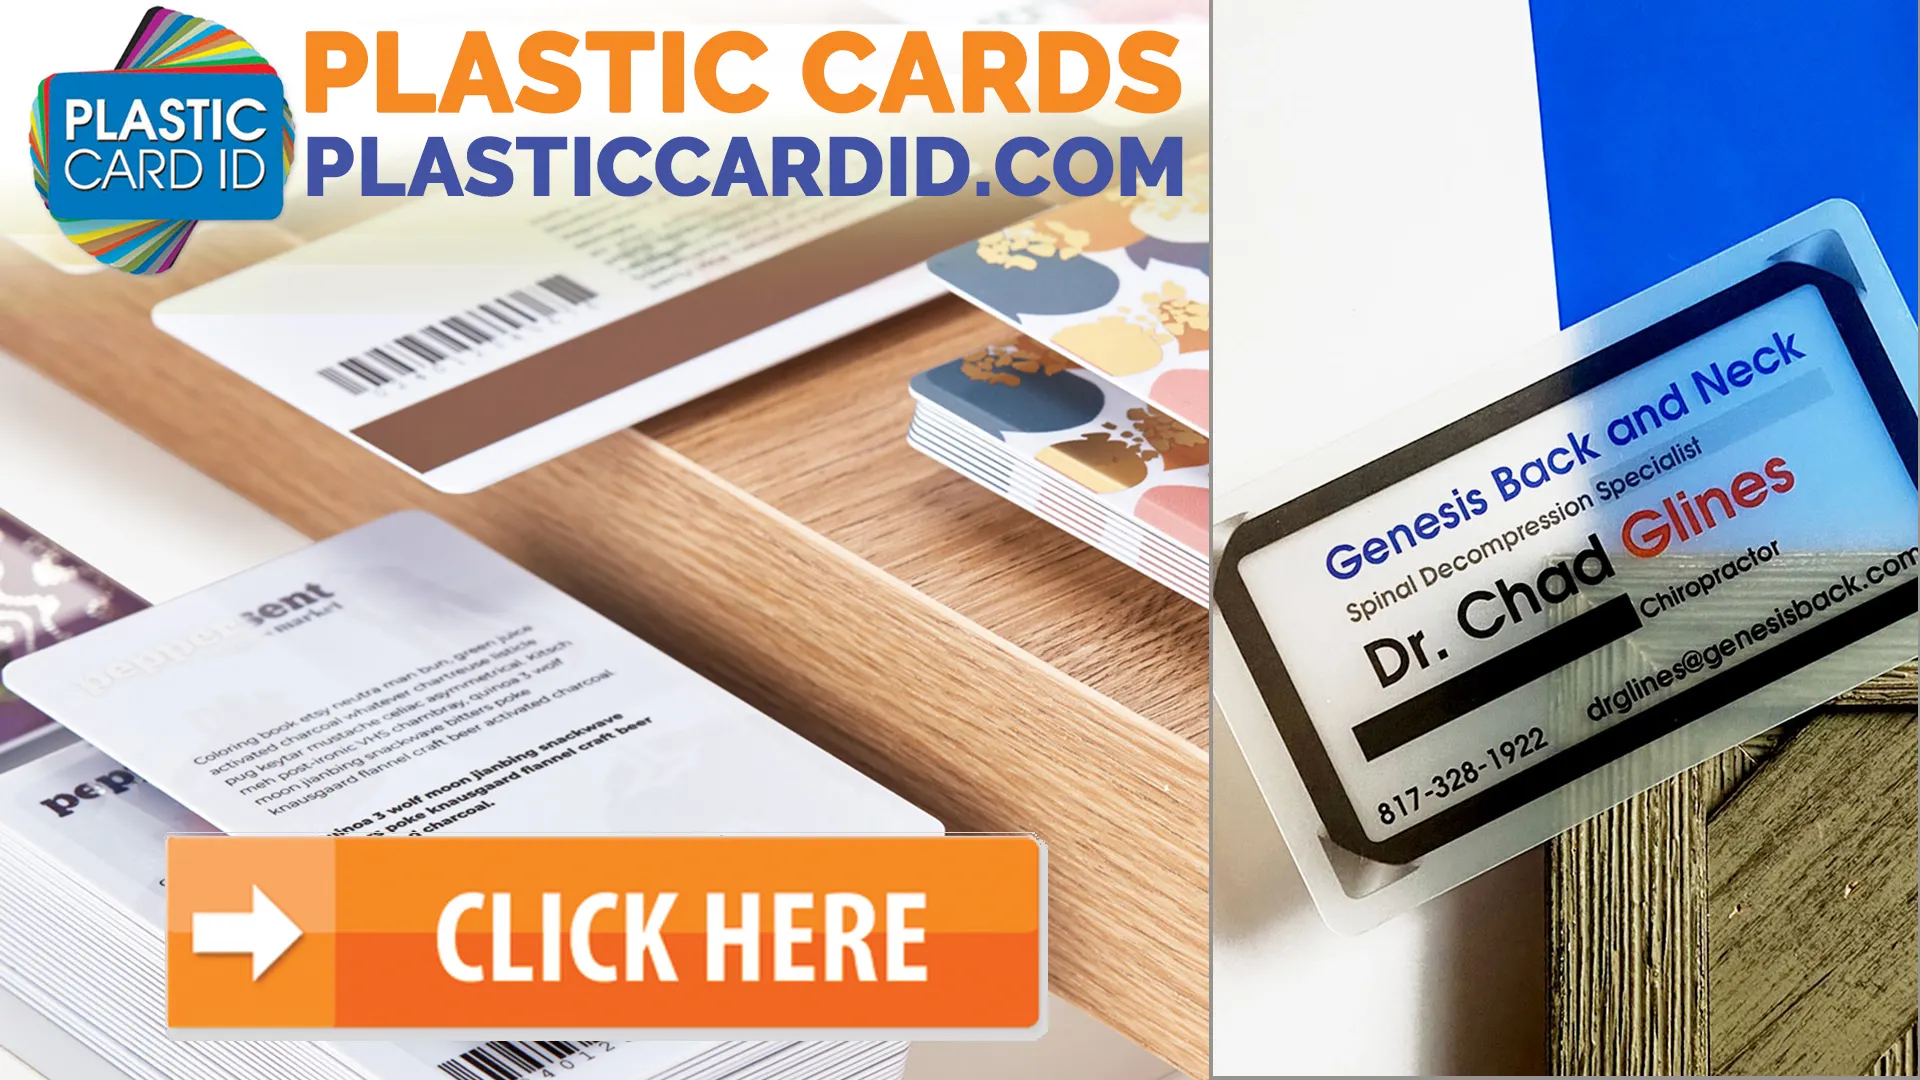 Discover the Range of Plastic Cards Available at Plastic Card ID




